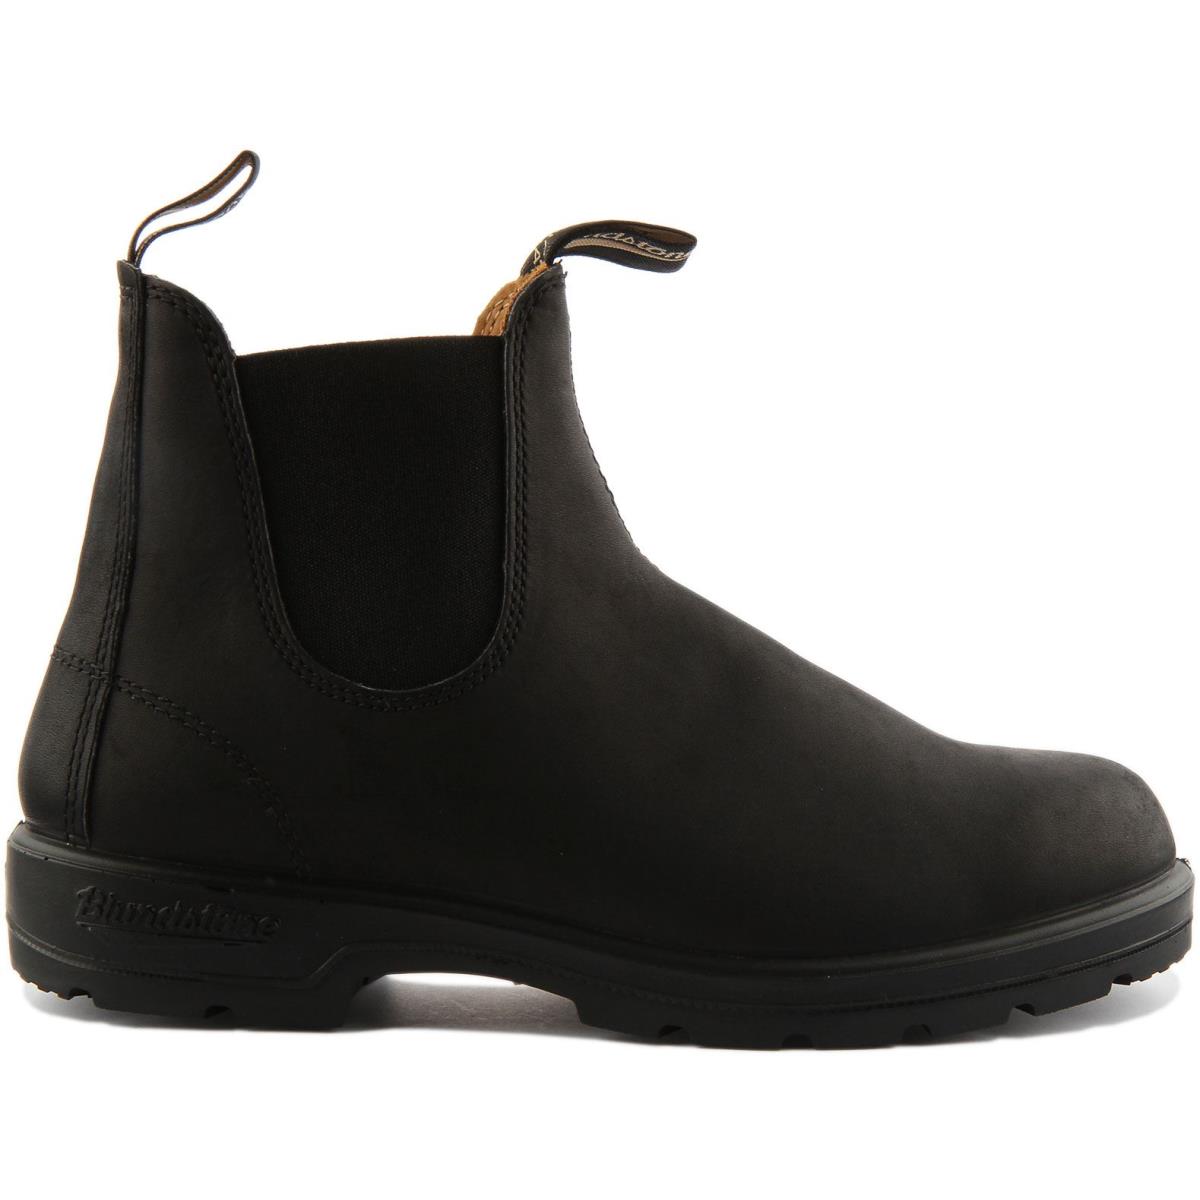 Blundstone 558 Unisex Pull On Leather Chelsea Boots In Black Size US 7 - 13